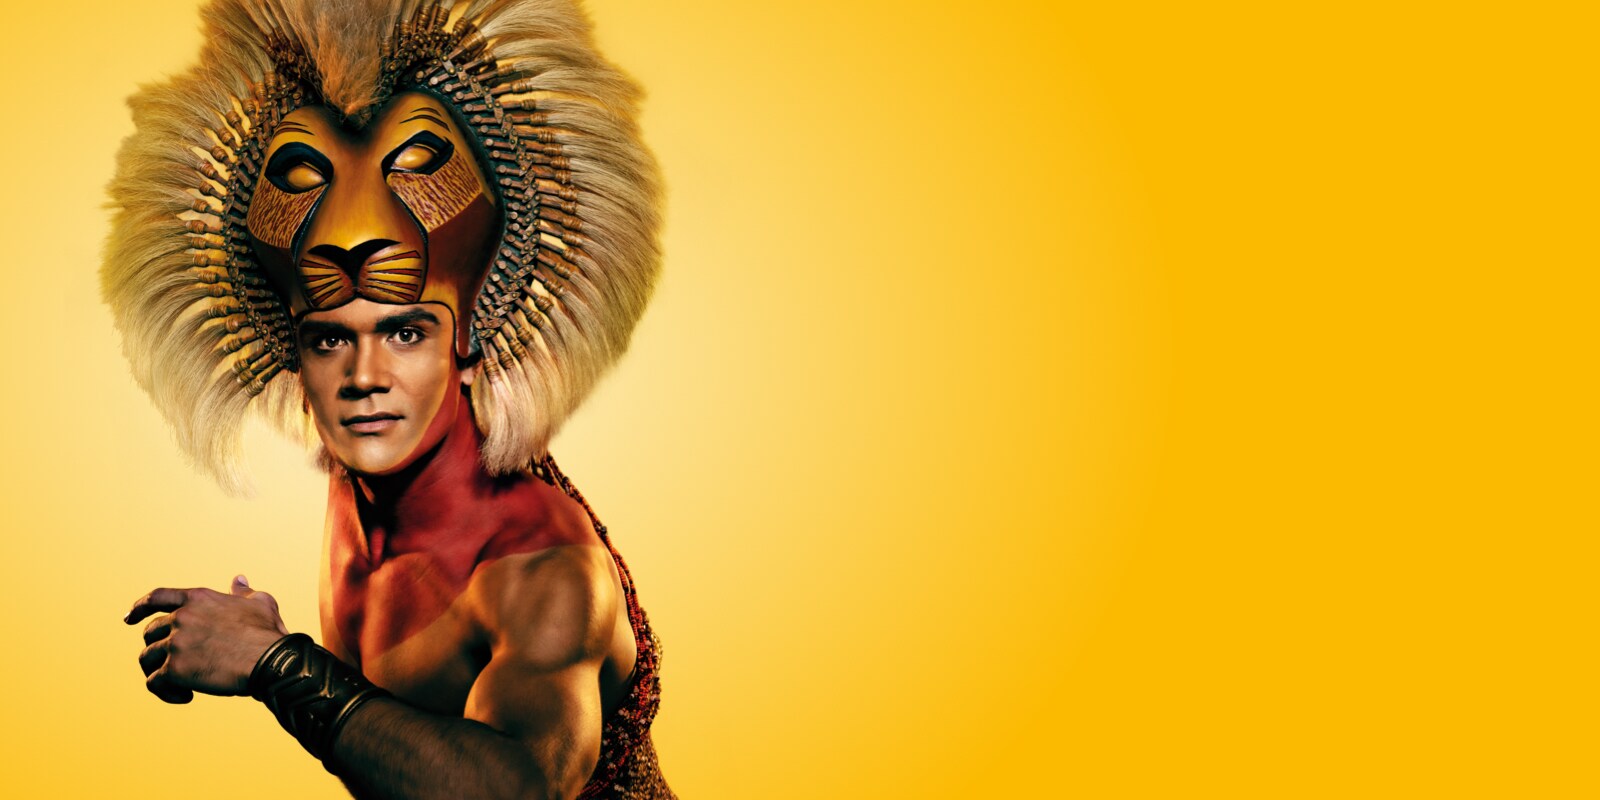 download lion king tickets ticketmaster